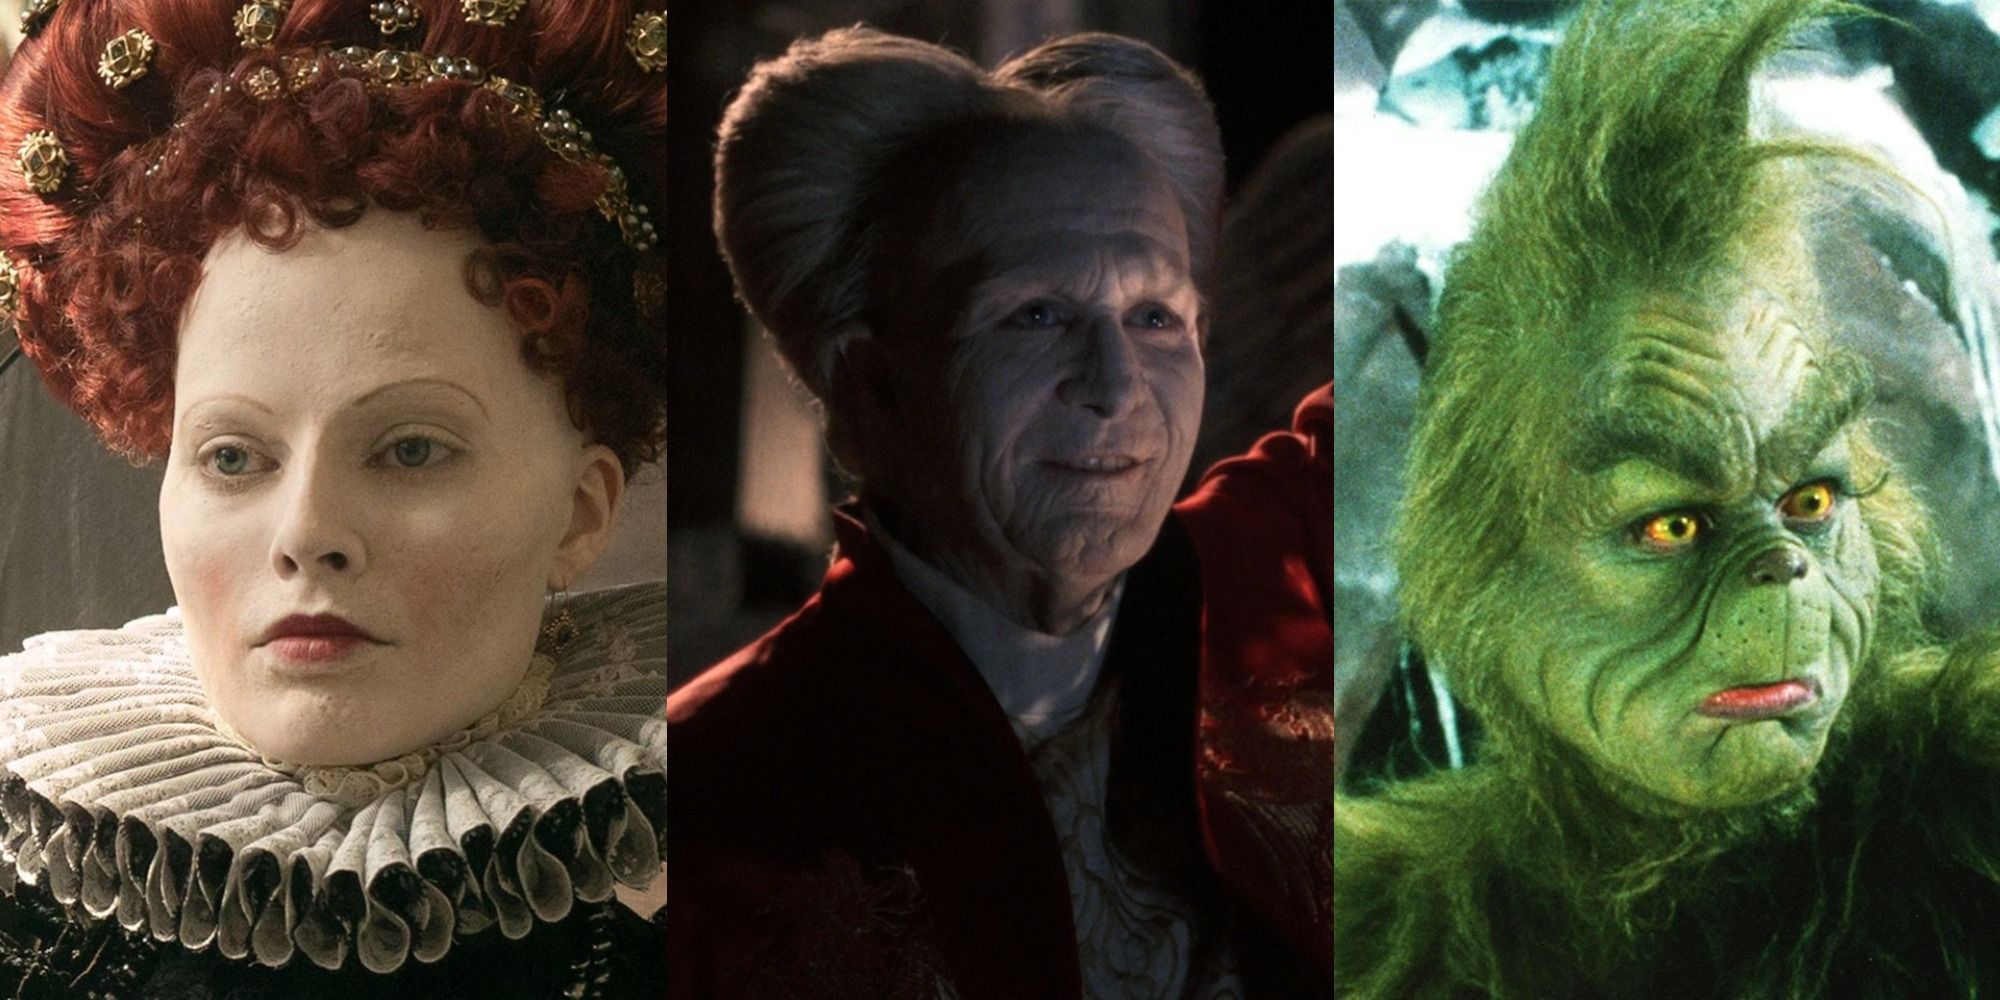 Mary Queen of Scots, Dracula, The Grinch